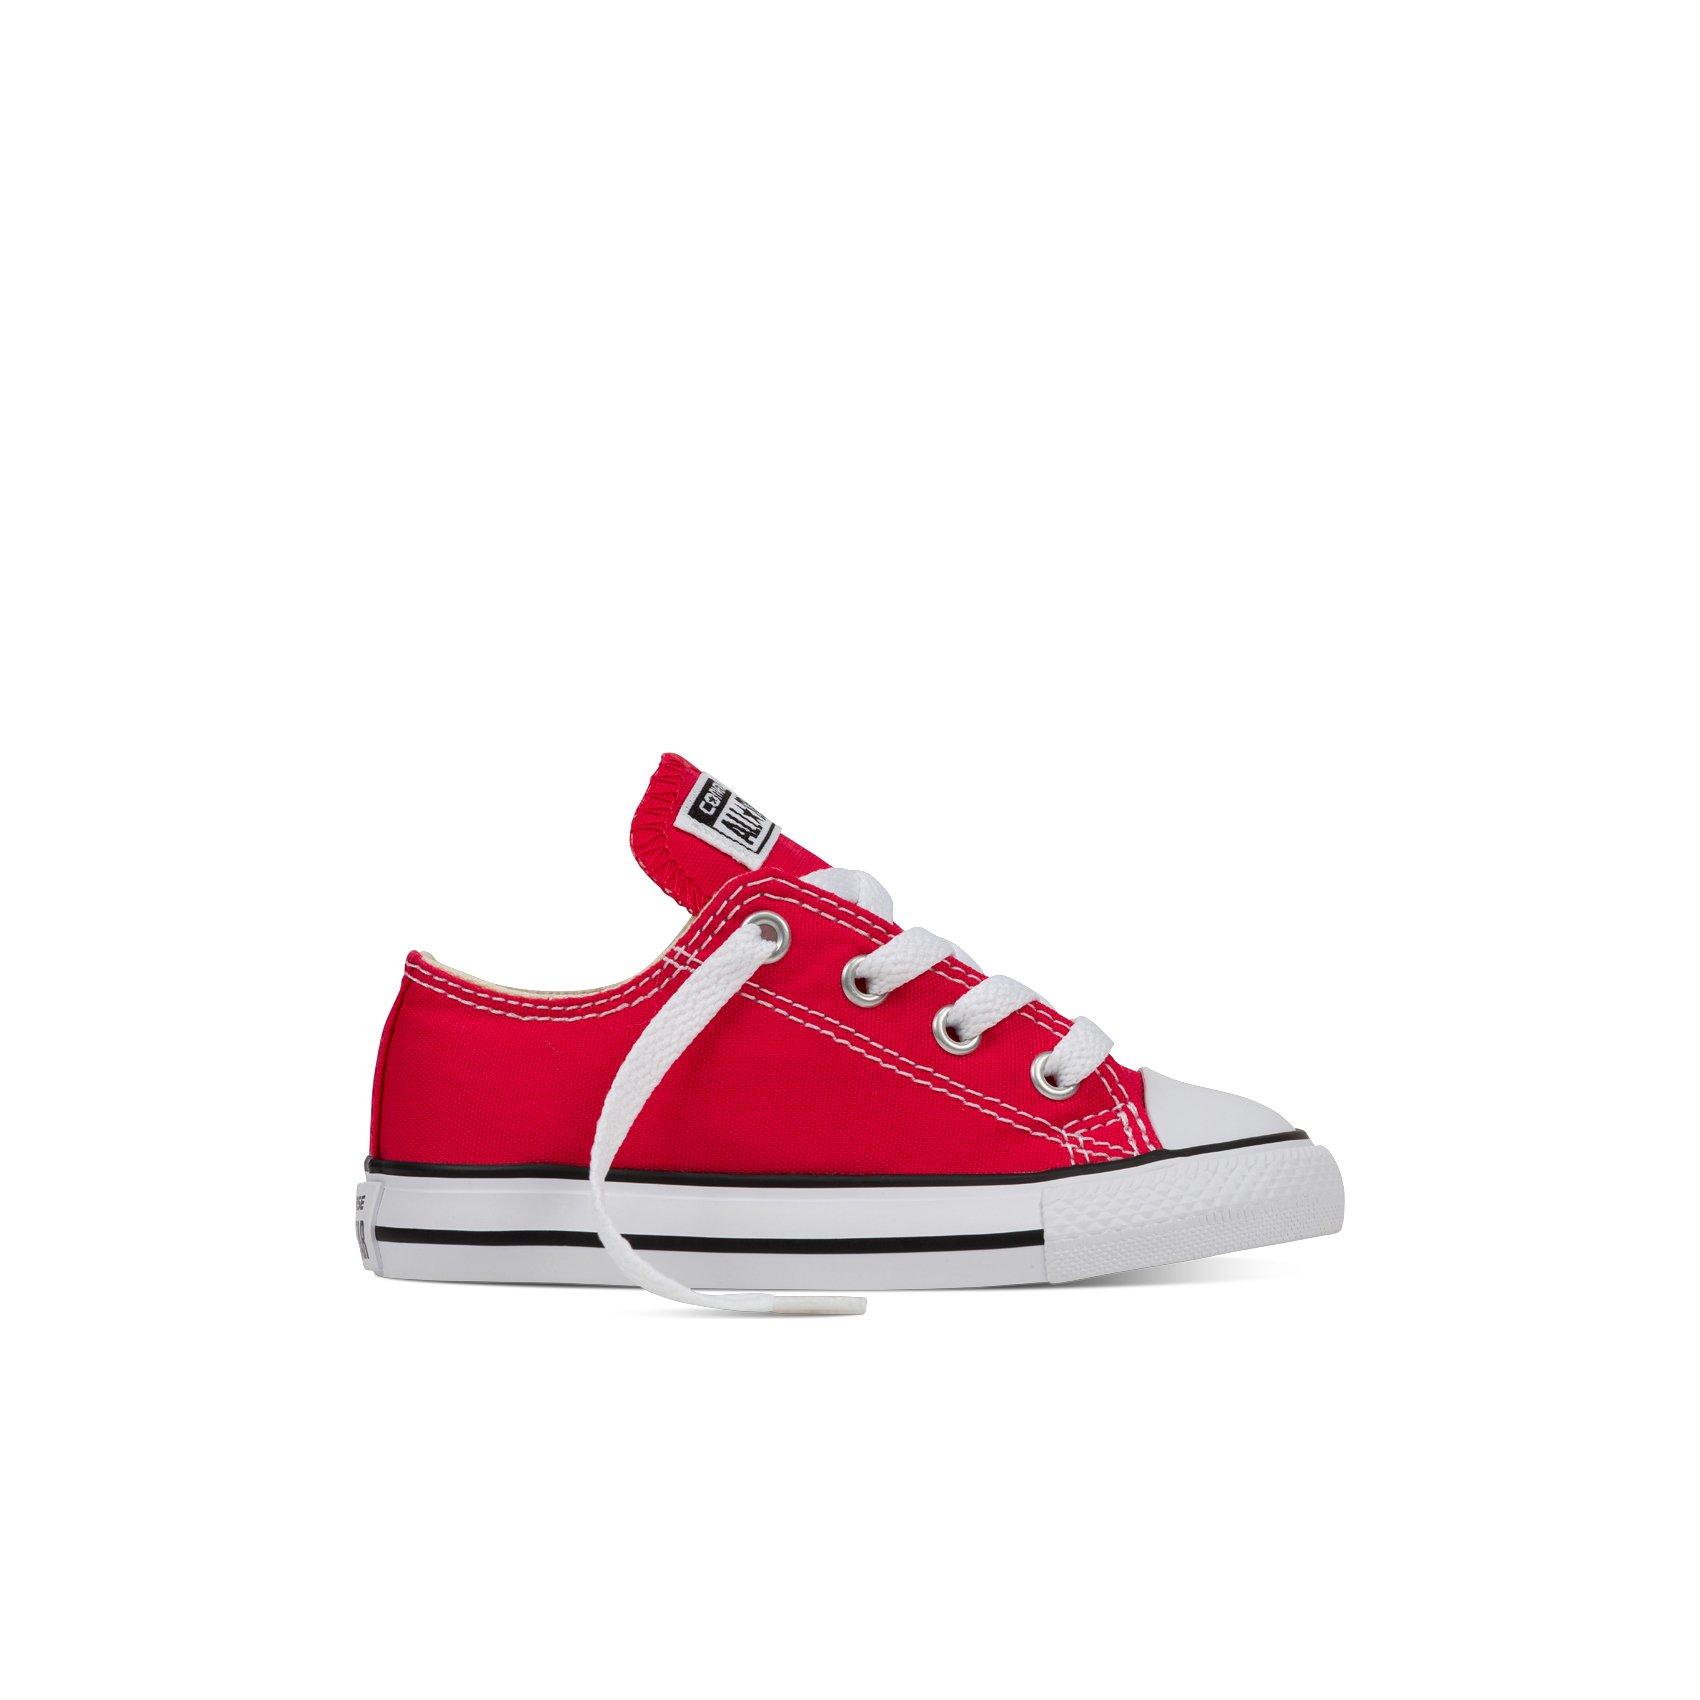 kids red converse shoes